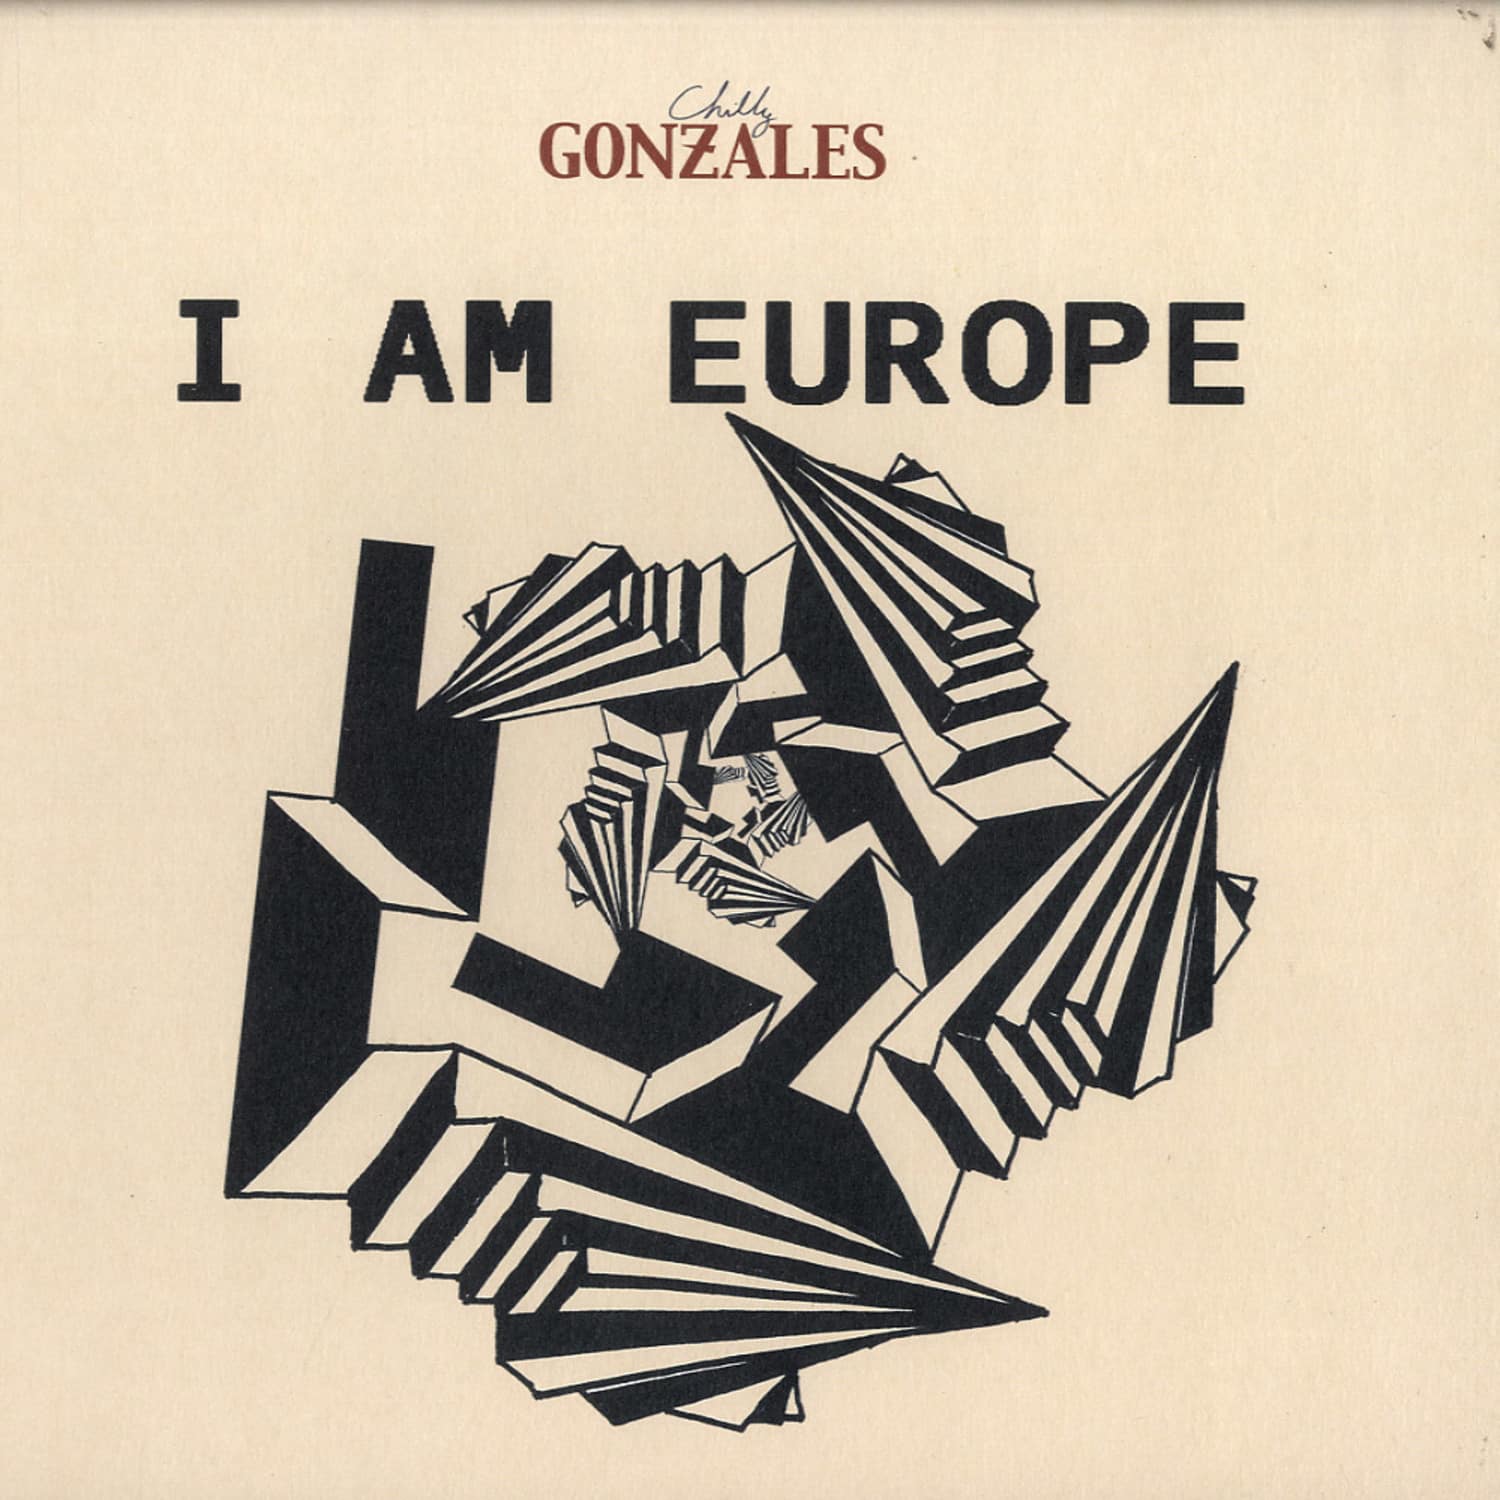 Chilly Gonzales - I AM EUROPE 